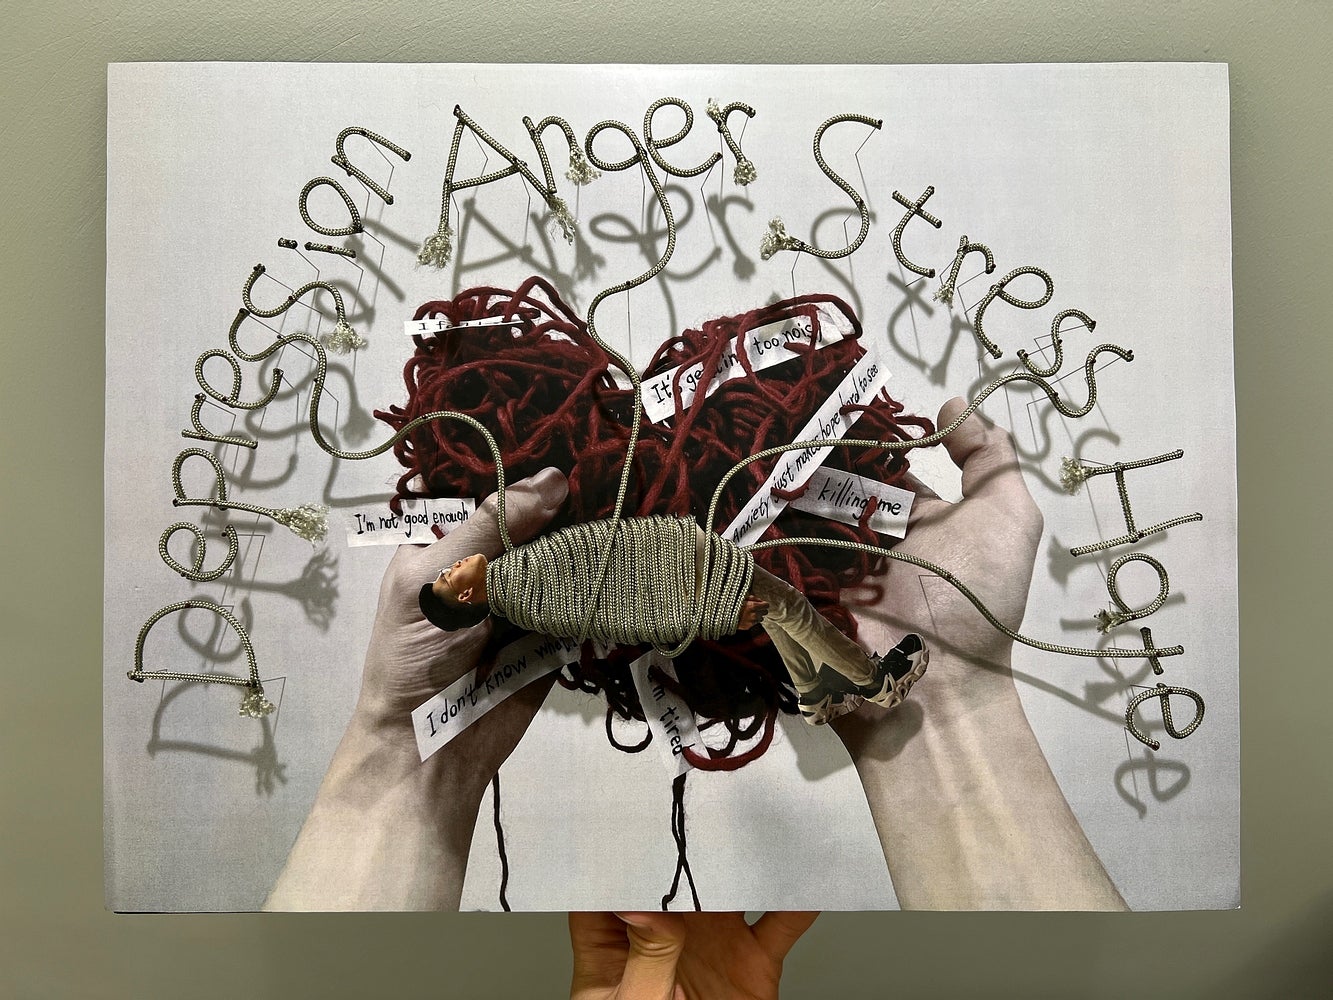 Photographic collage of two hands holding bundle of yarn with a wrapped figure, yarn forms words "depression anger stress hate"